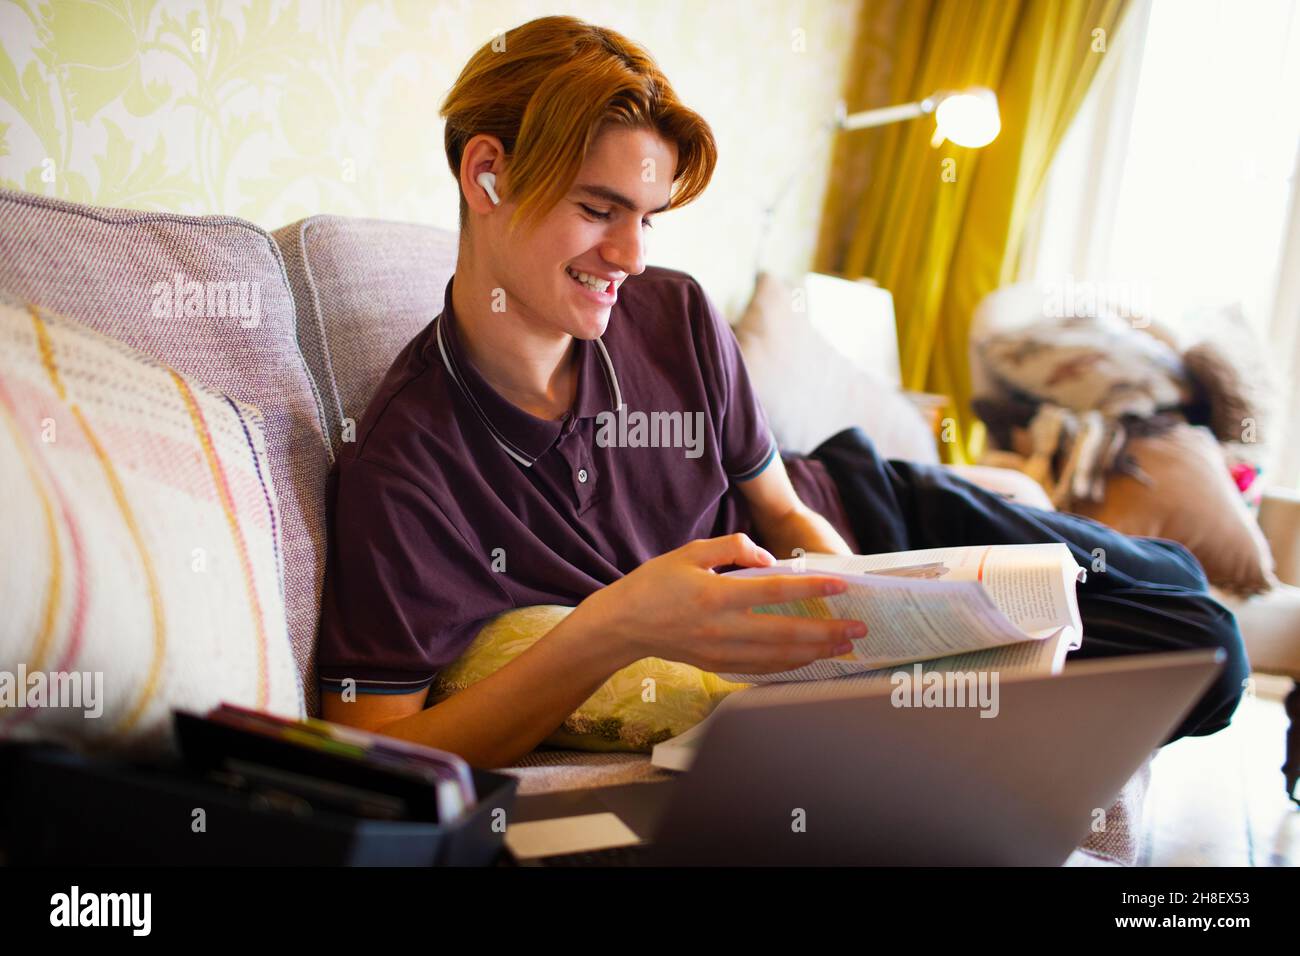 Smiling teenage boy with textbook and laptop studying at home Stock Photo